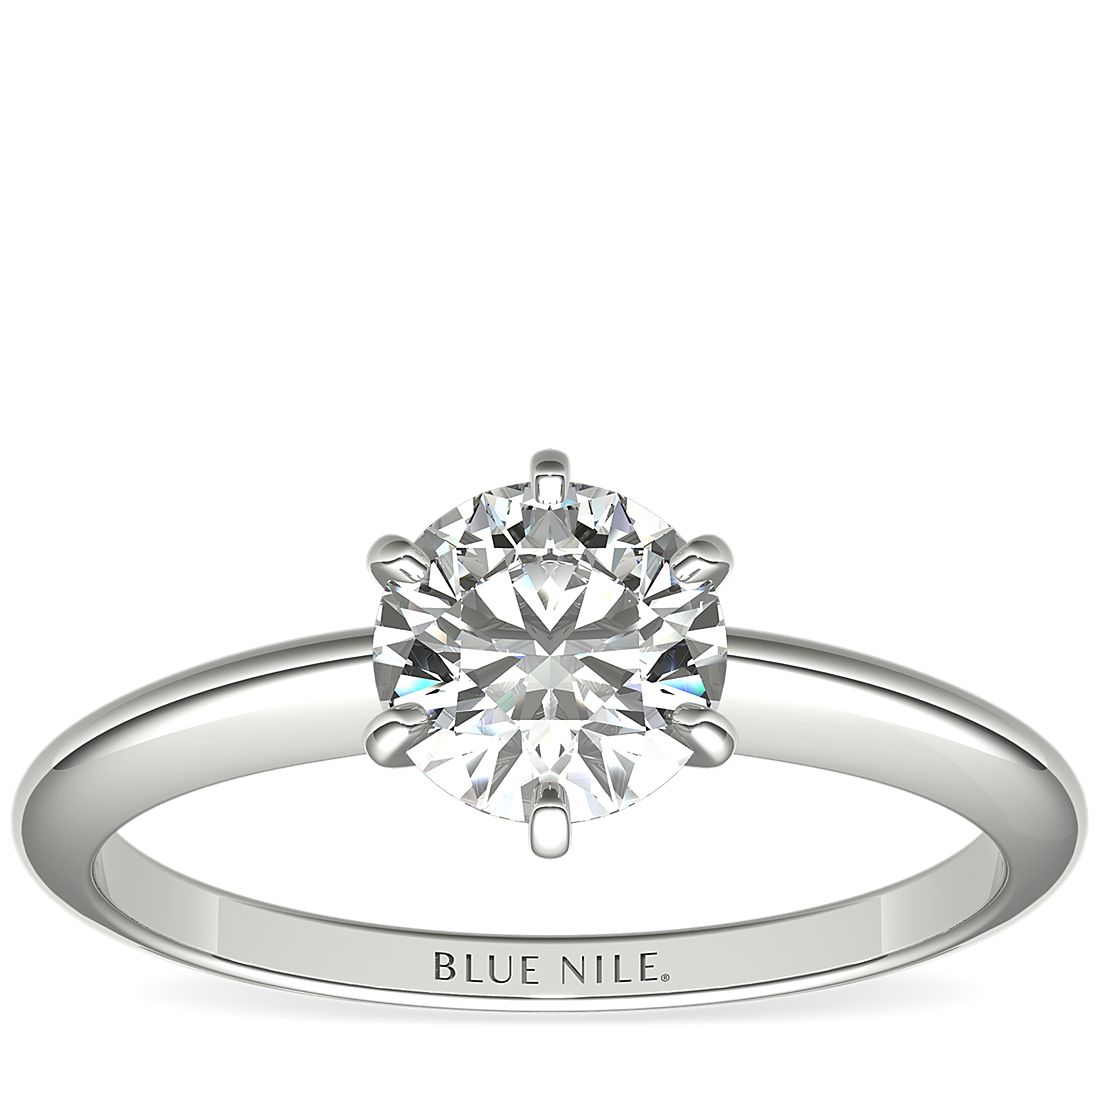 A six-prong solitaire engagement ring with a 1-carat round center diamond.